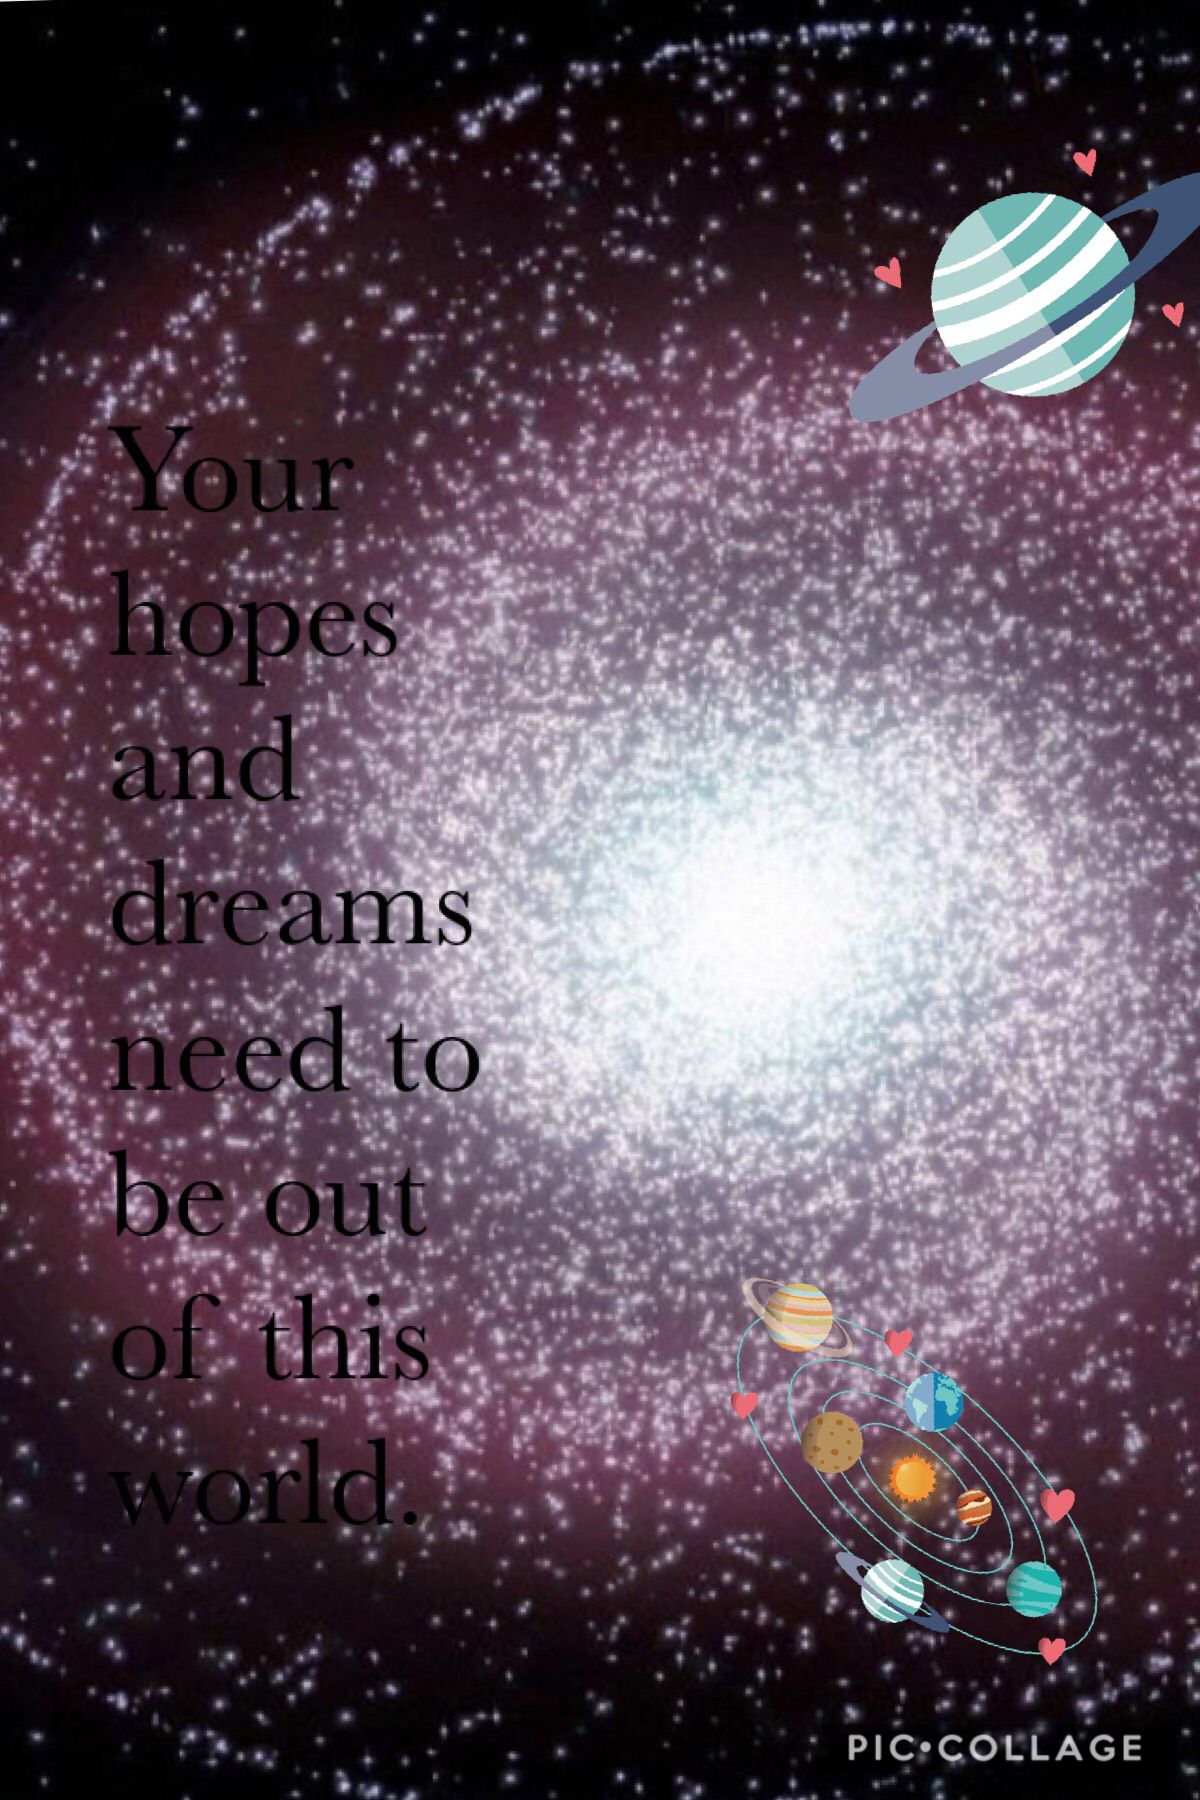 Your hopes and dreams need to be out of this world on order to sucseed